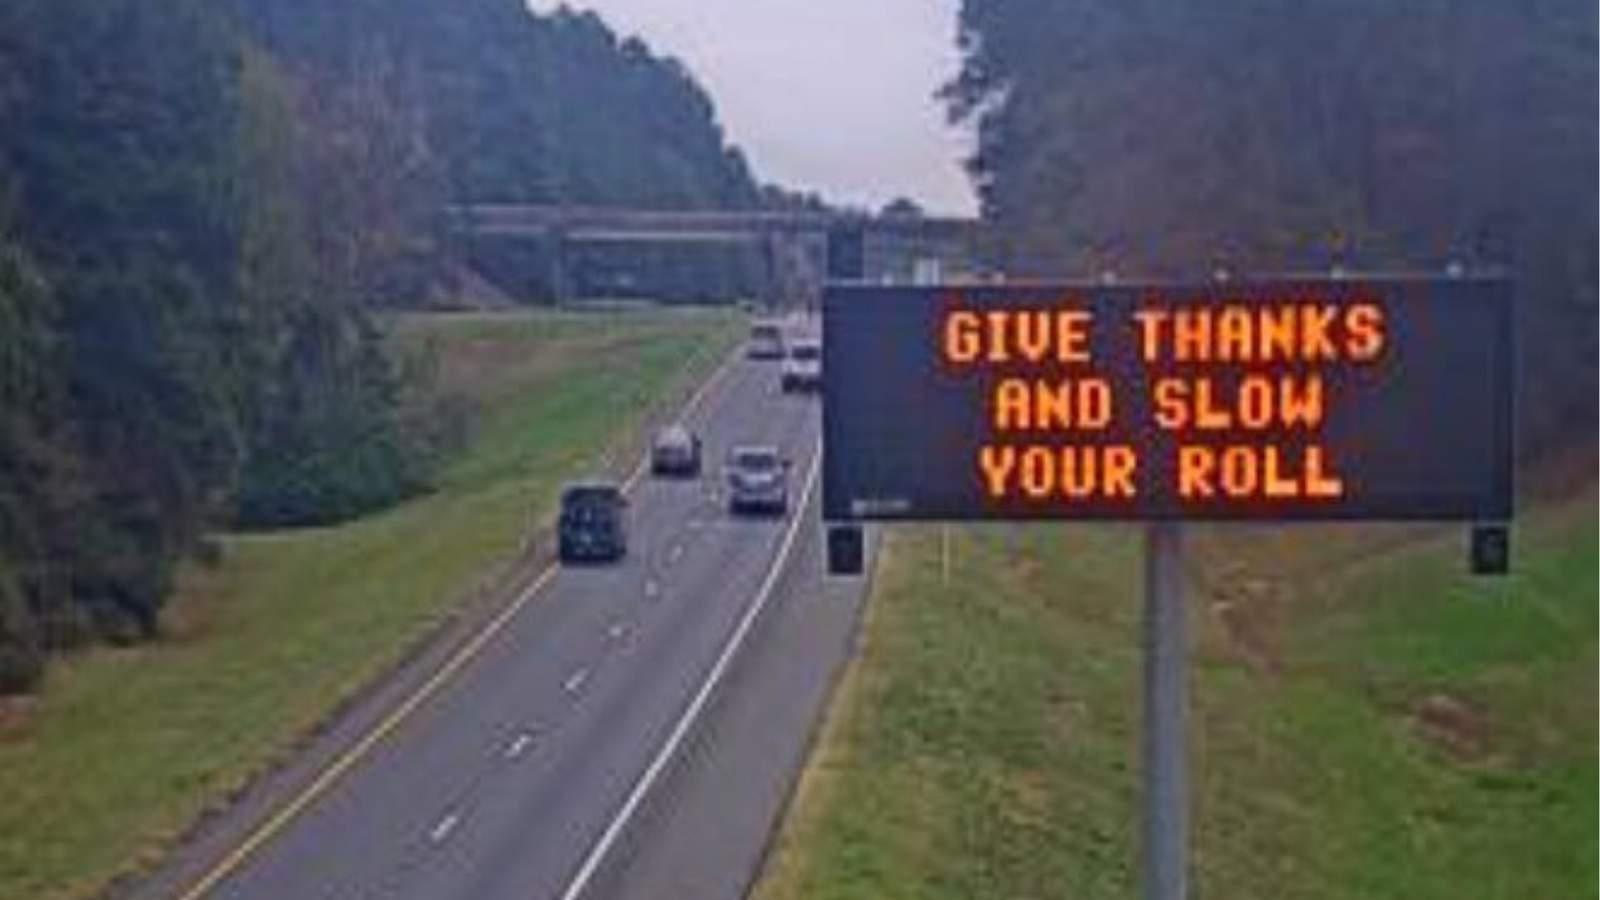 Here’s how your clever message could end up on a Texas highway sign